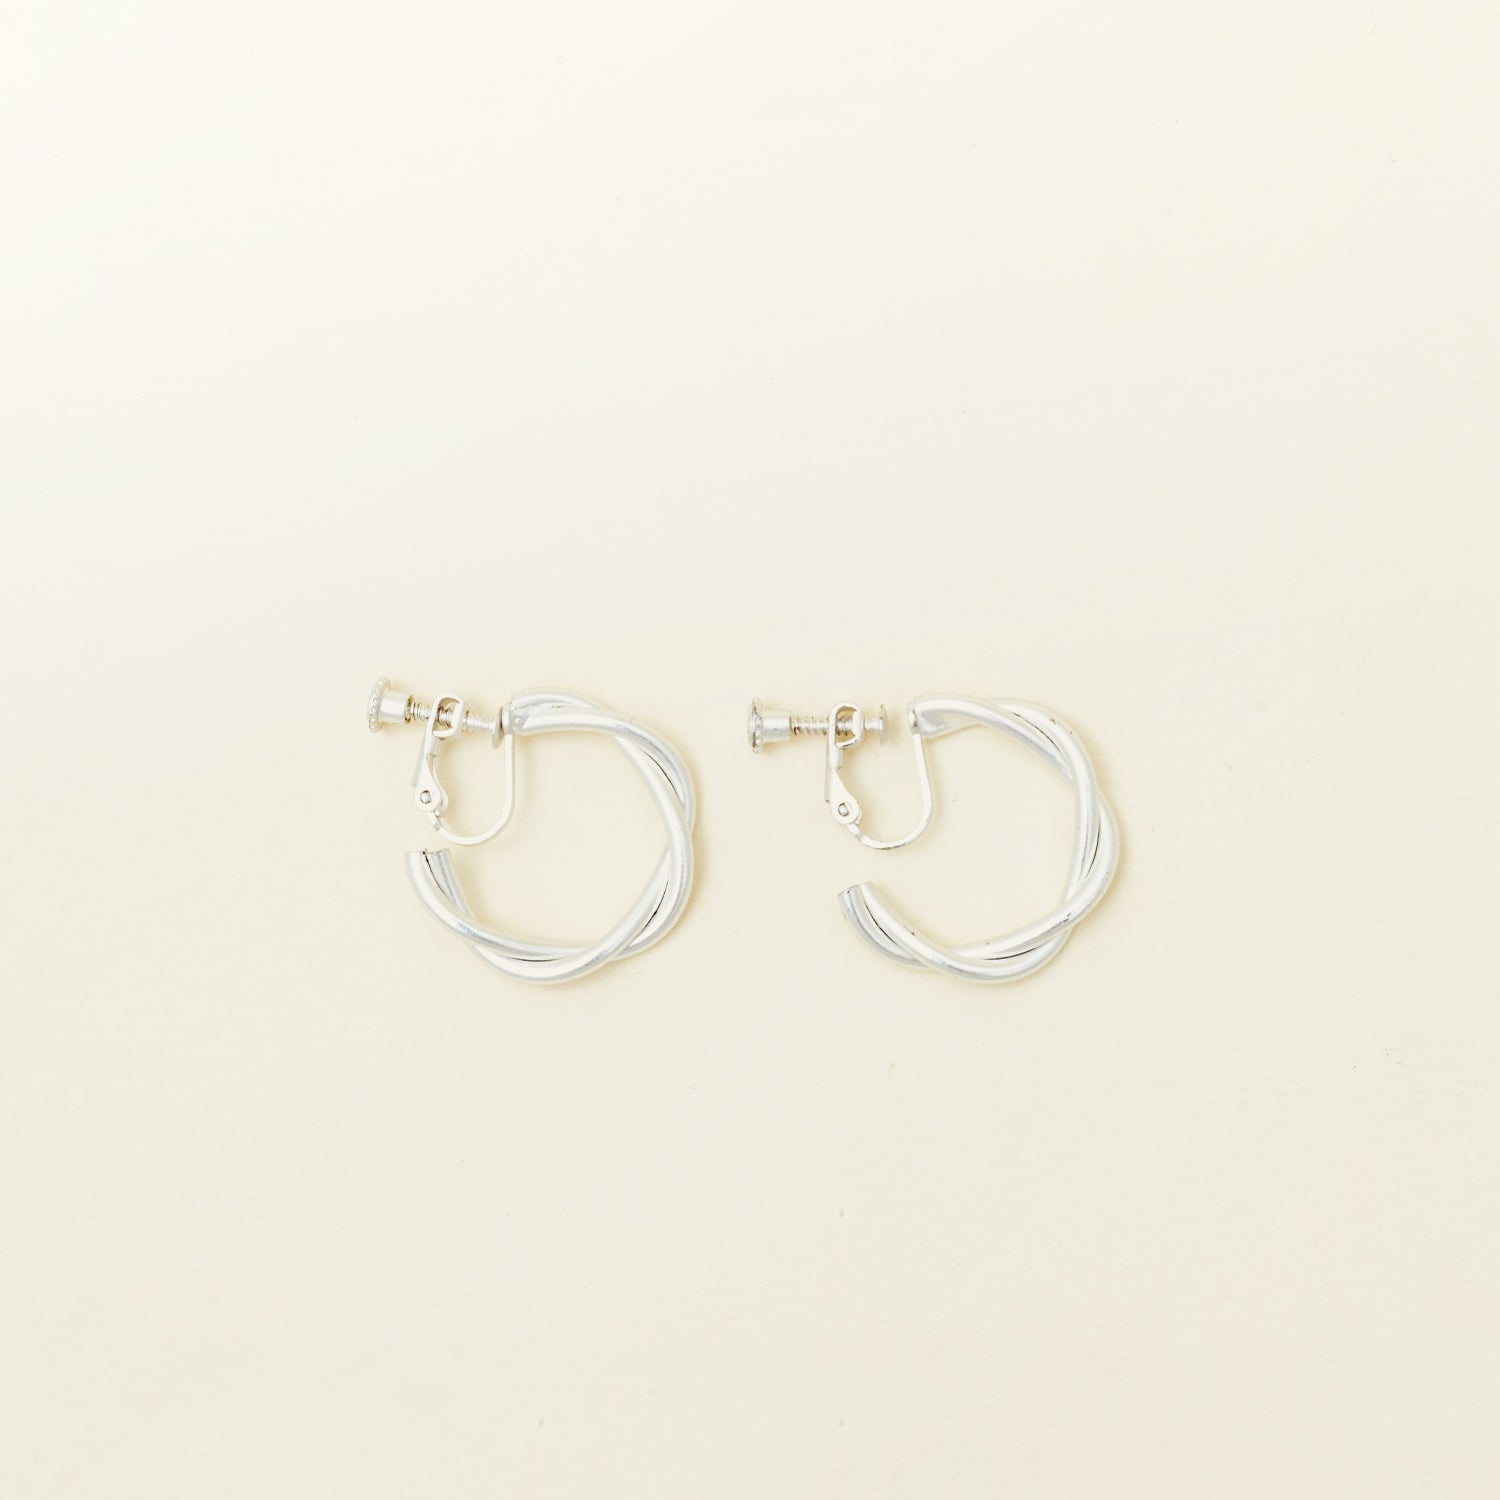 Image of the Twist Hoop Earrings feature a secure and comfortable screwback clip-on closure ideal for all ear types. 